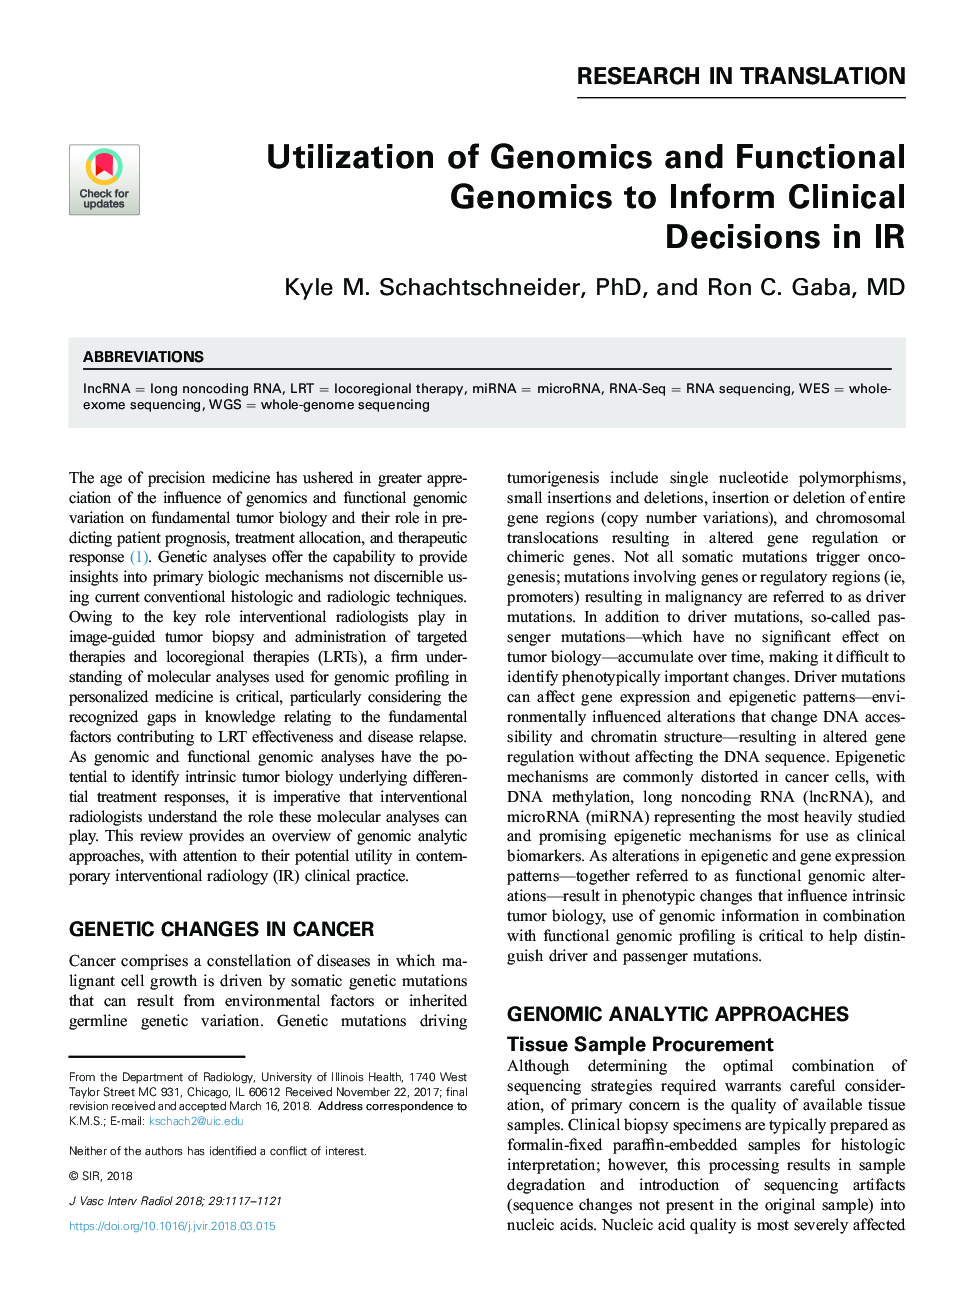 Utilization of Genomics and Functional Genomics to Inform Clinical DecisionsÂ in IR